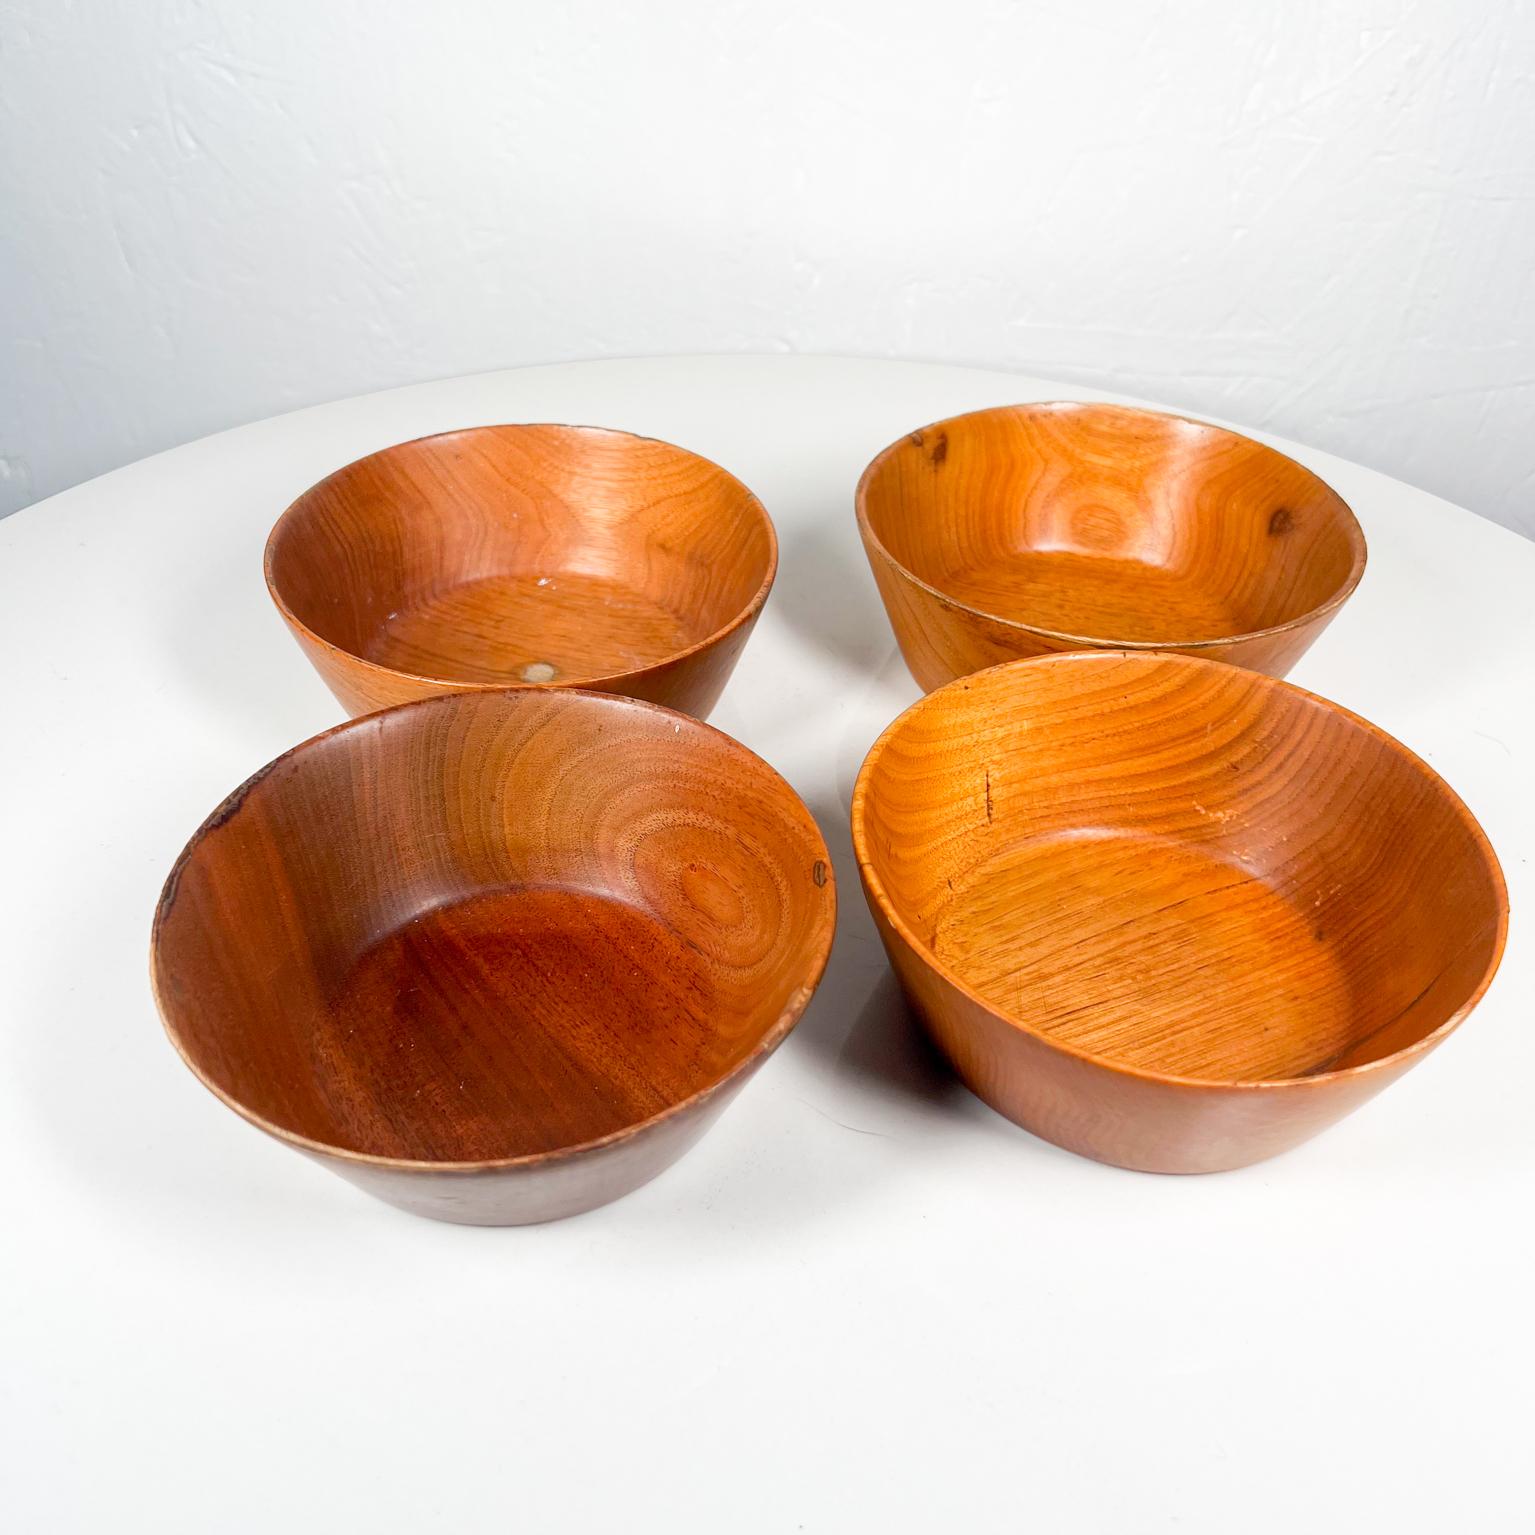 
1960s American Studio Craft Hand-Carved Wood Bowl Set by Harry Nohr
Harry Nohr bowl maker is known as the father of modern wood turning.
5.13 diameter x 1.75 h
Preowned original unrestored vintage condition
Please review all images for condition.